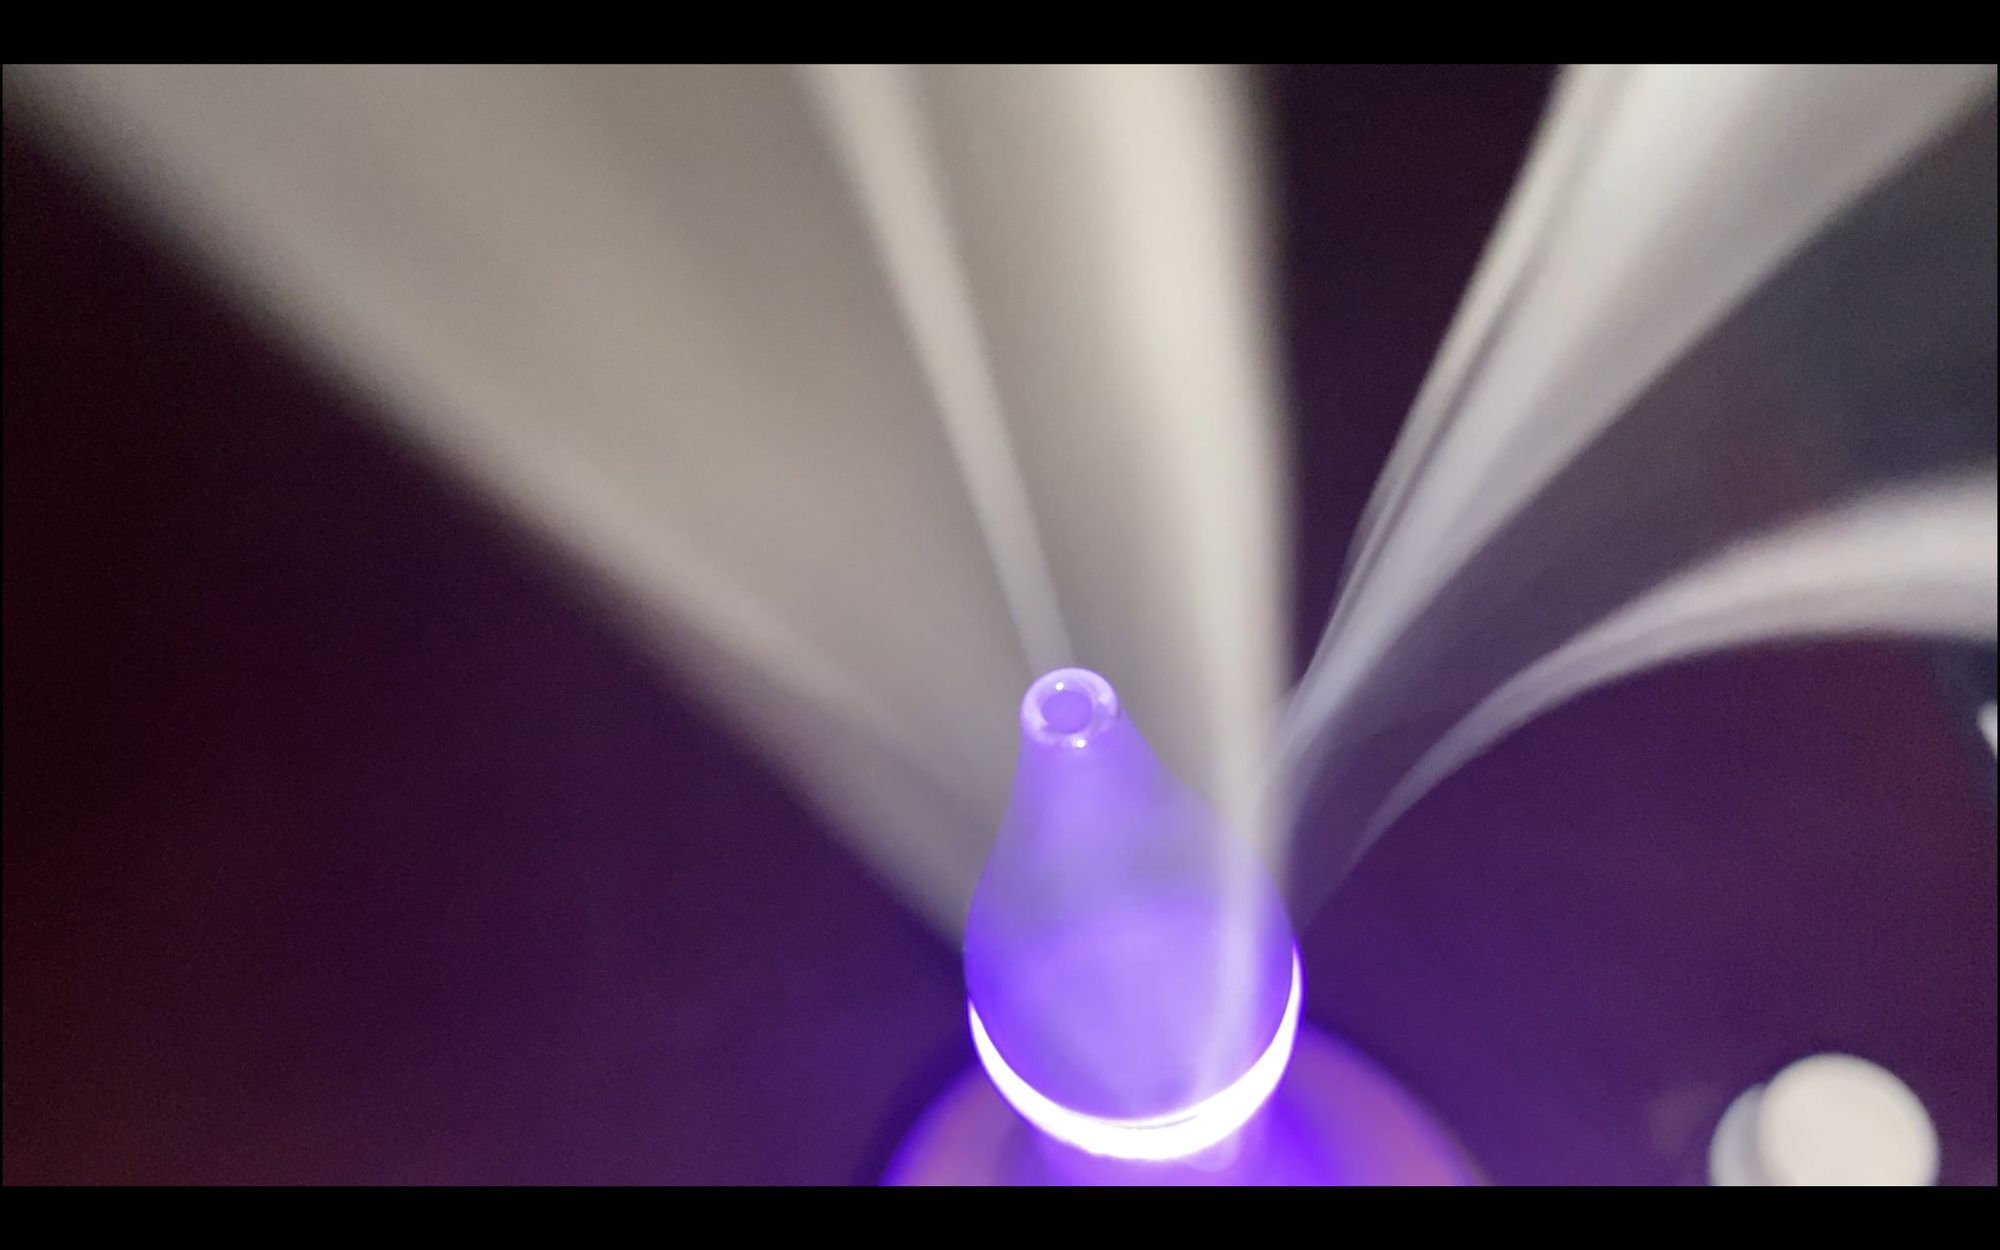 The nebulizing diffuser in action.